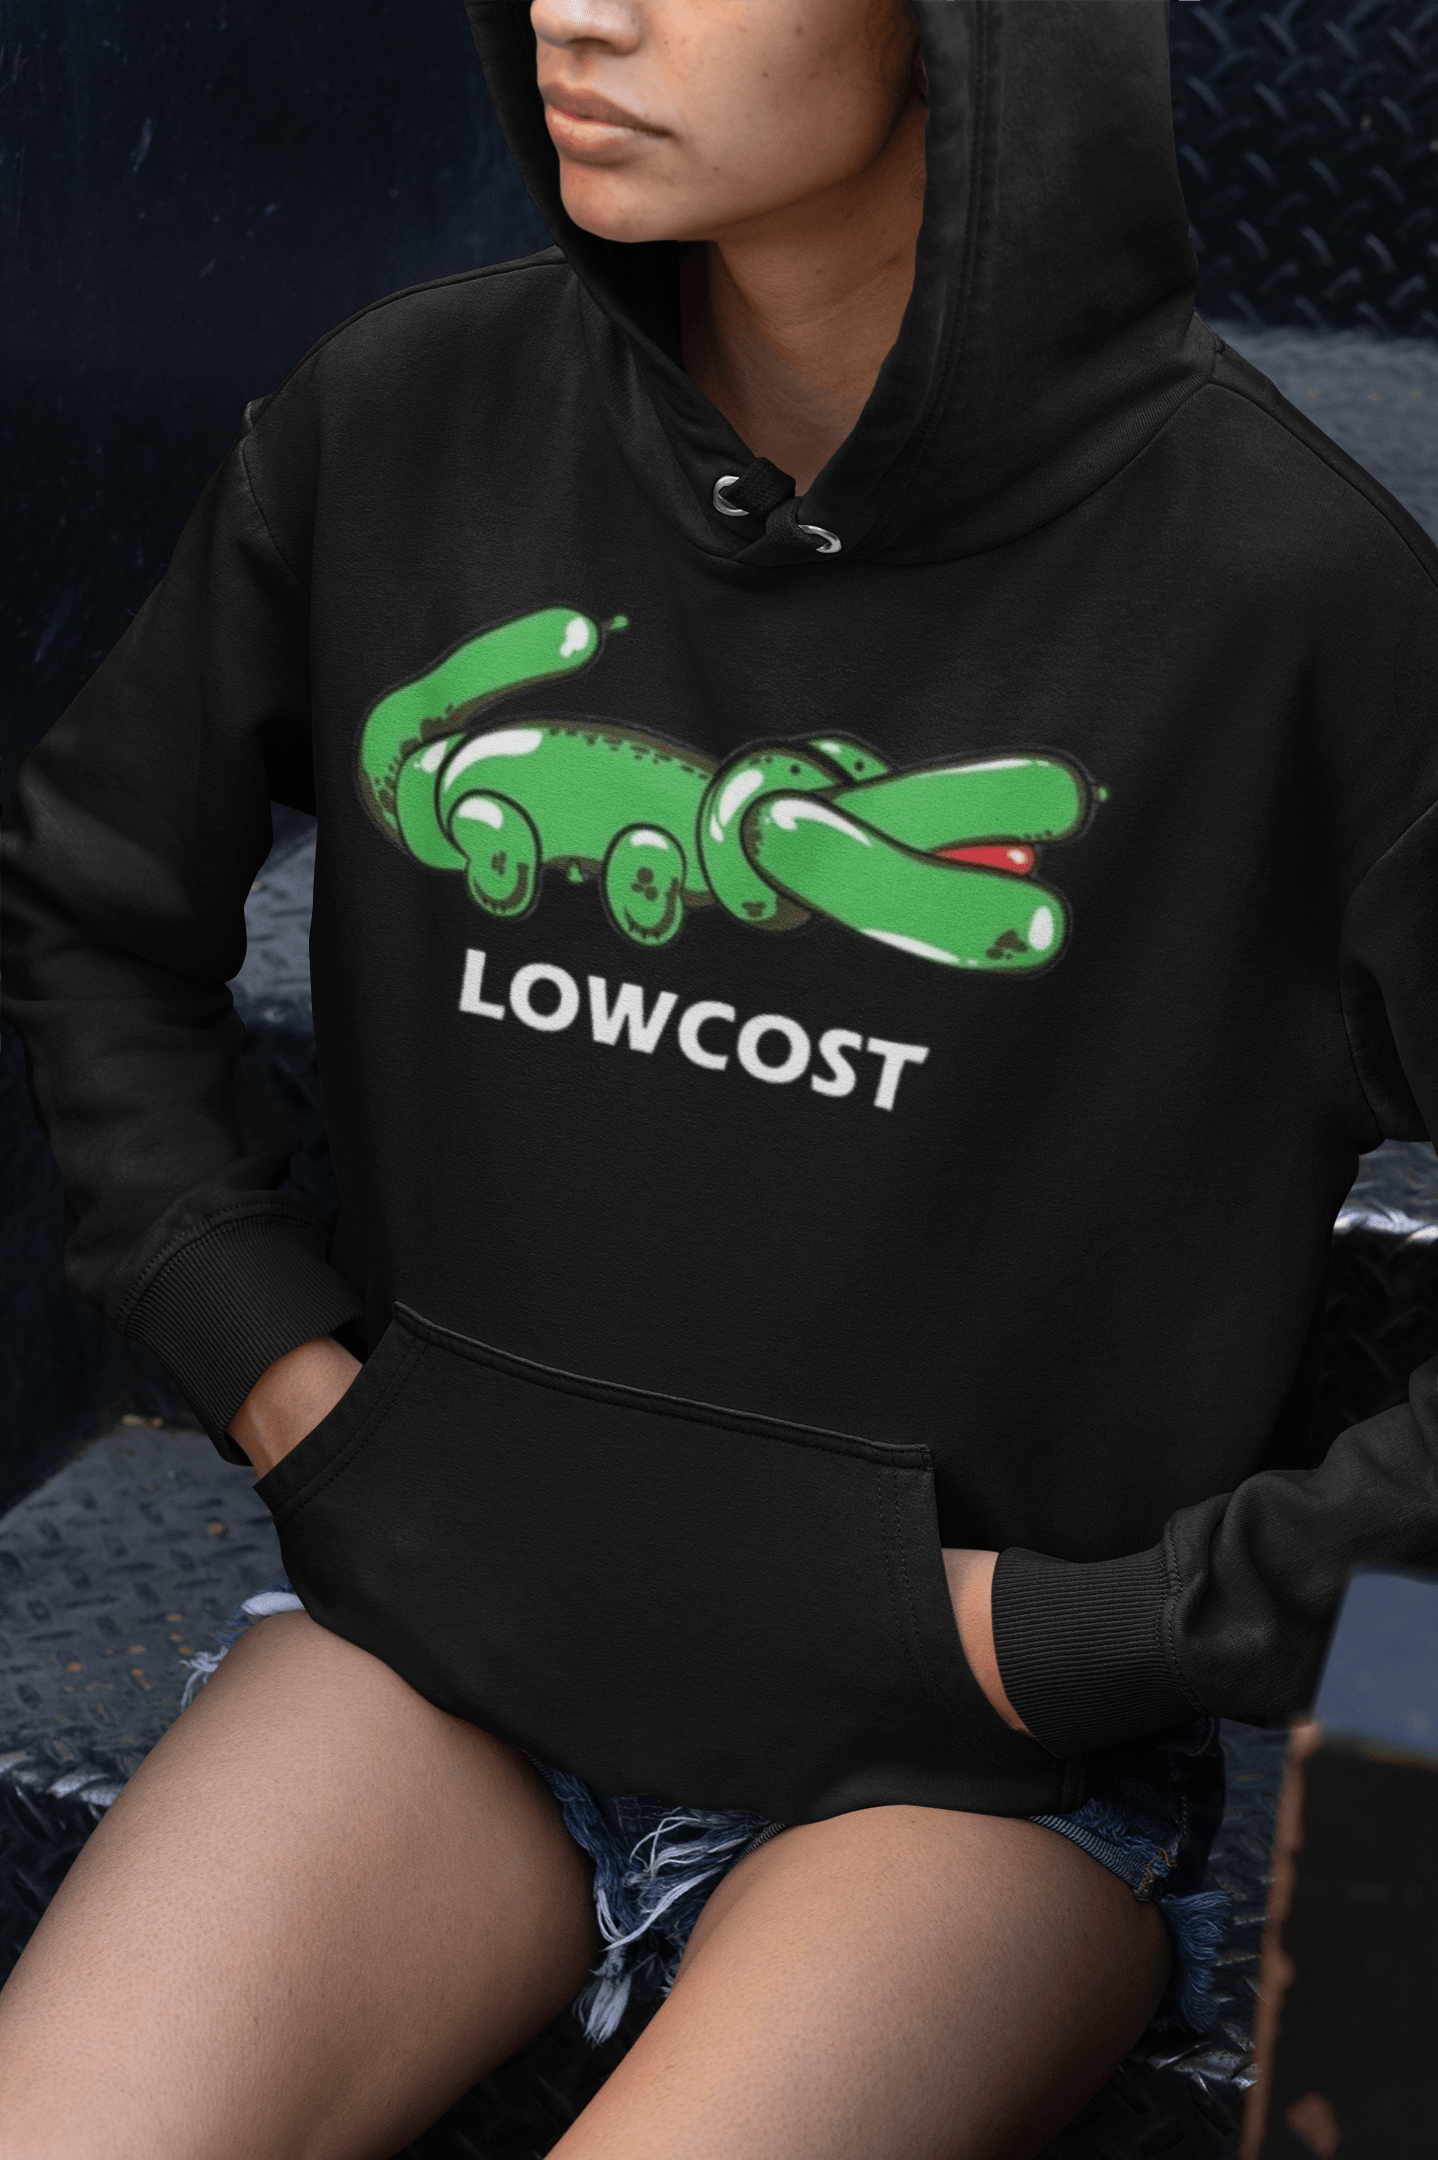 Ultra Soft Hoodie Blended Cotton Midweight Unisex Pullover LowCost Alligator - TopKoalaTee